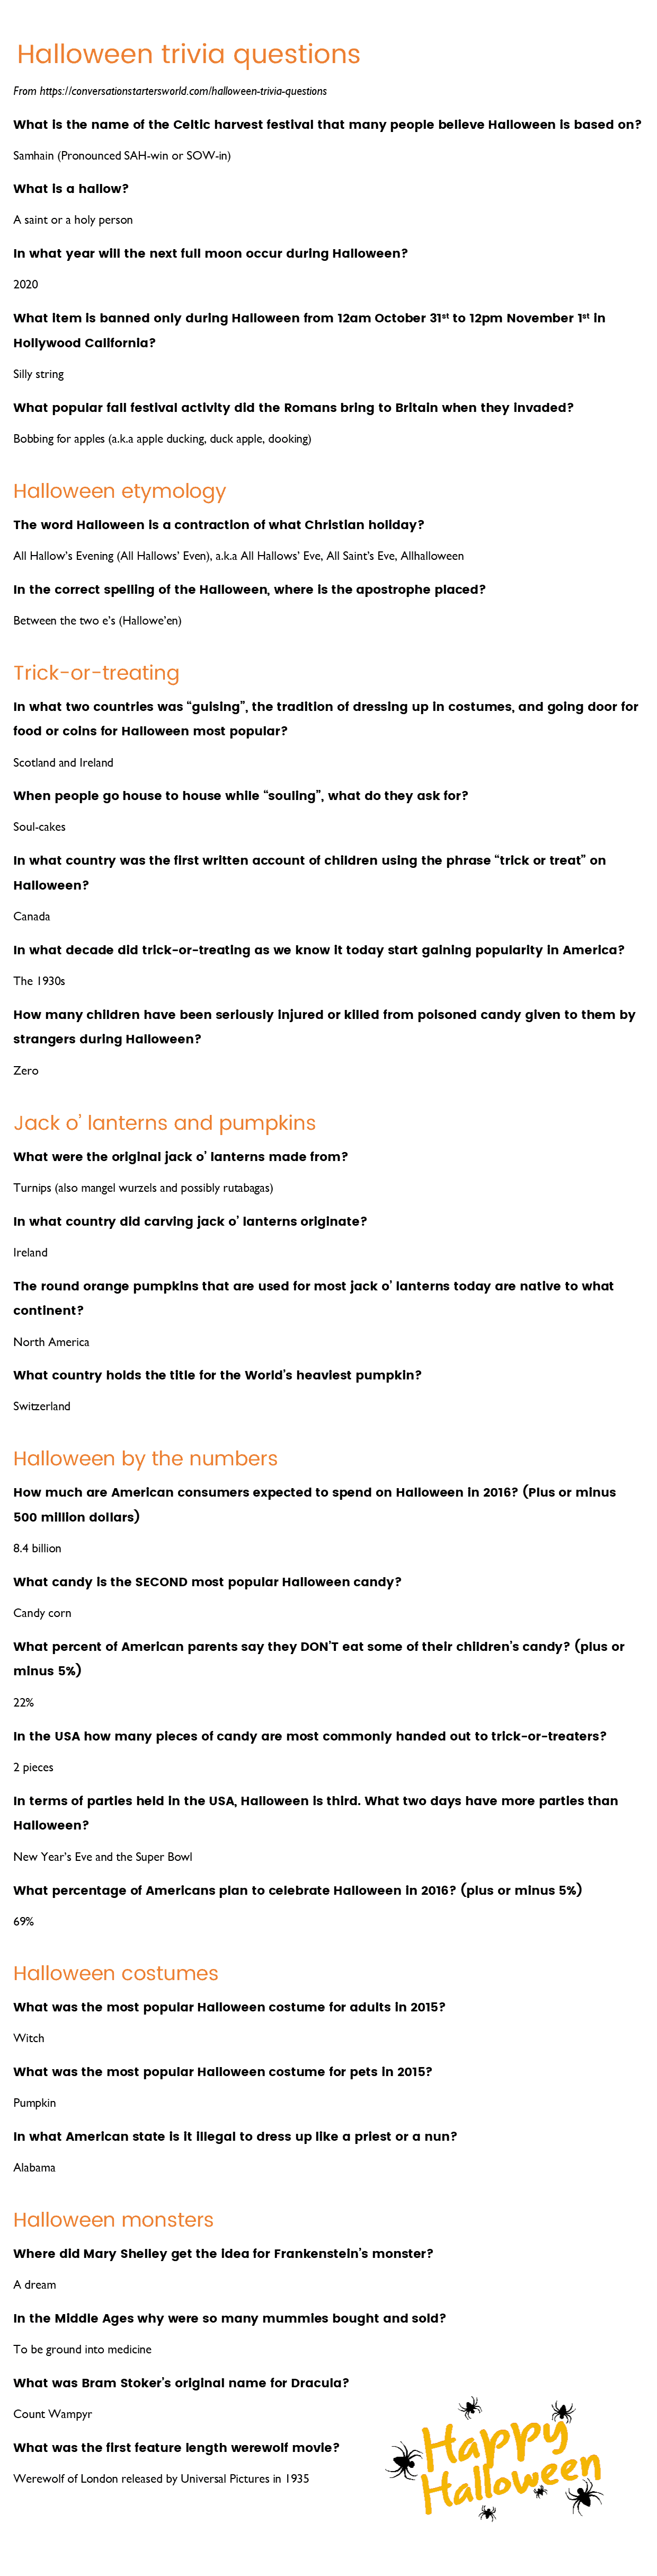 29 Challenging Halloween Trivia Questions - How Many Can You